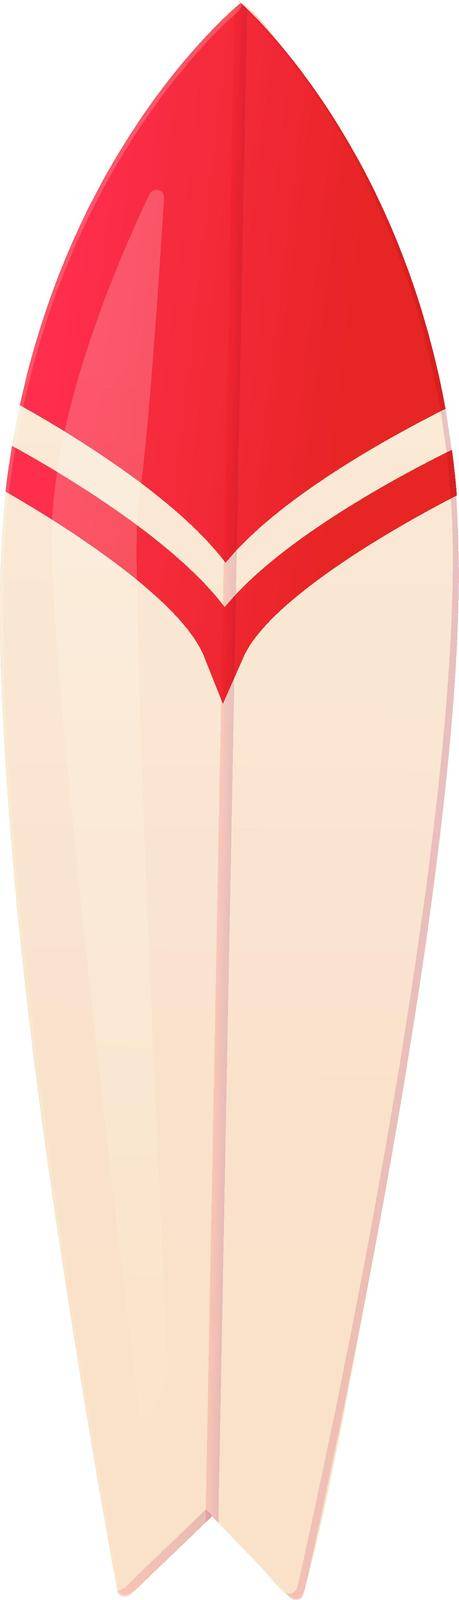 Surfboard red and white in realistic cartoon style. Active summer leisure concept by Daaridna